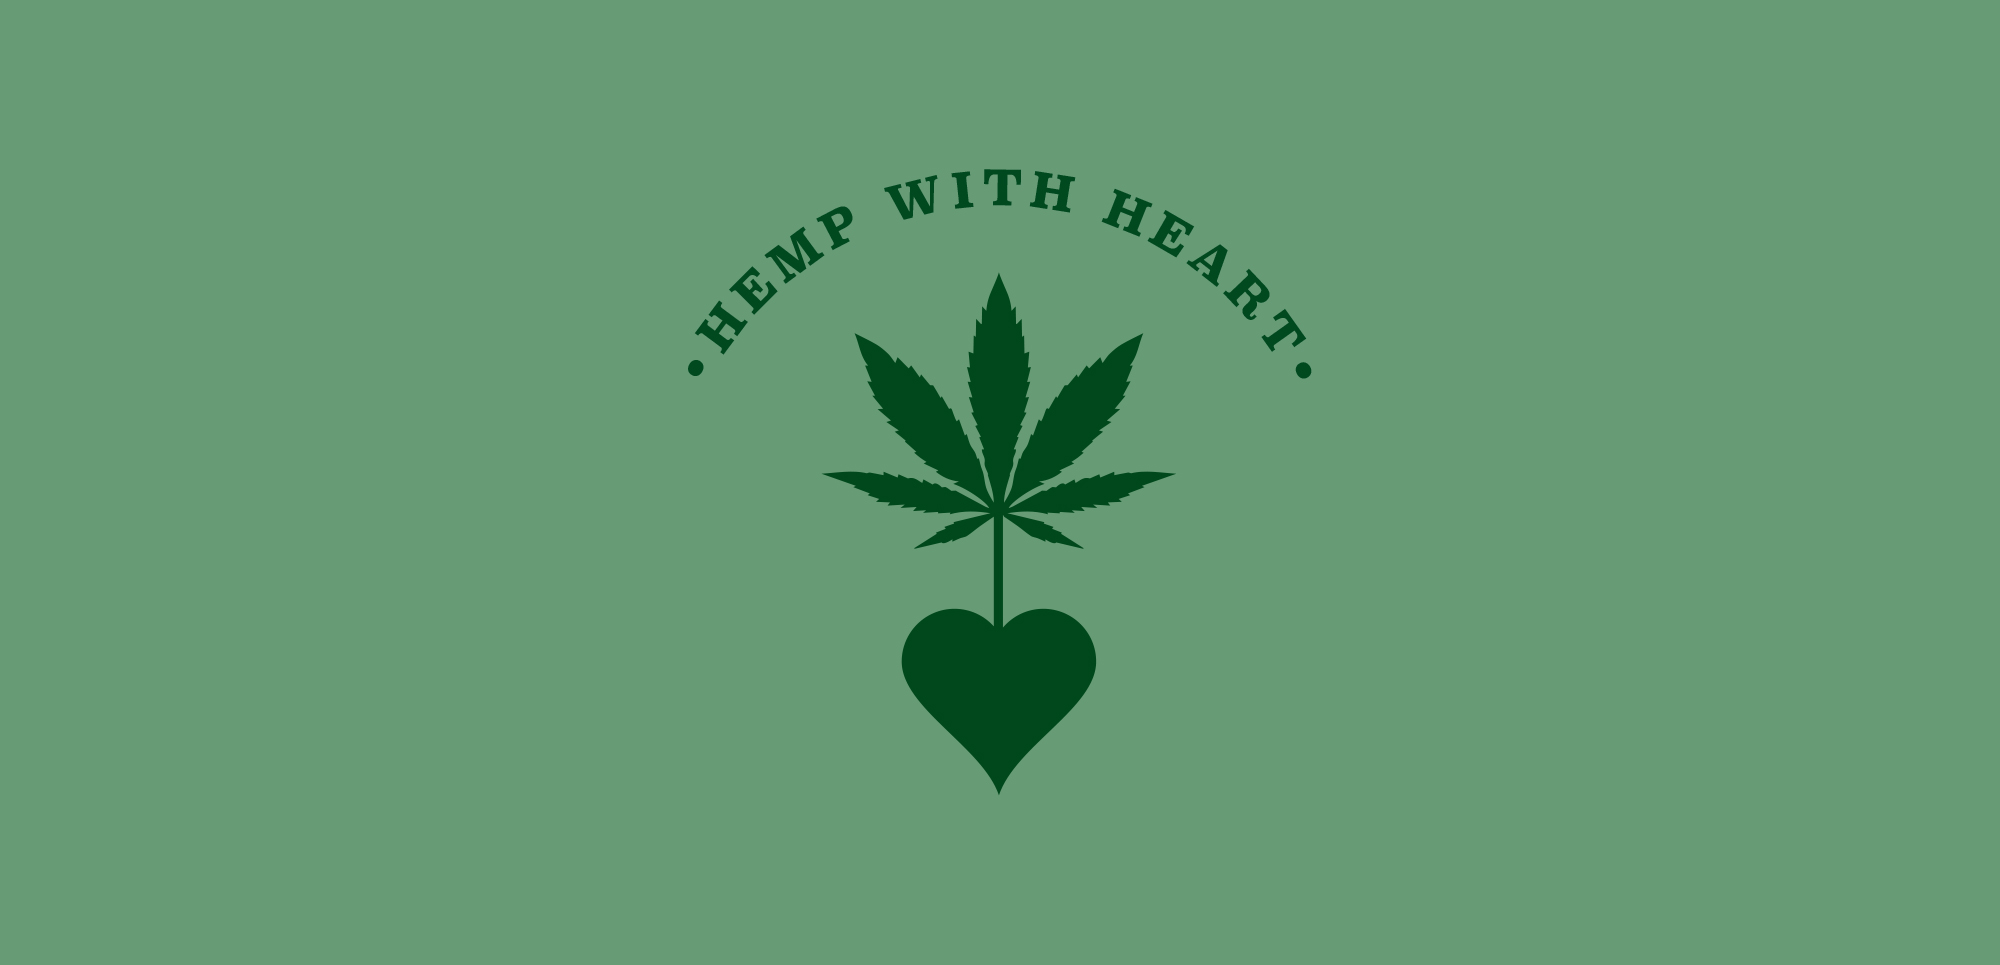 Featured image for “What Hemp with Heart Means to Us”